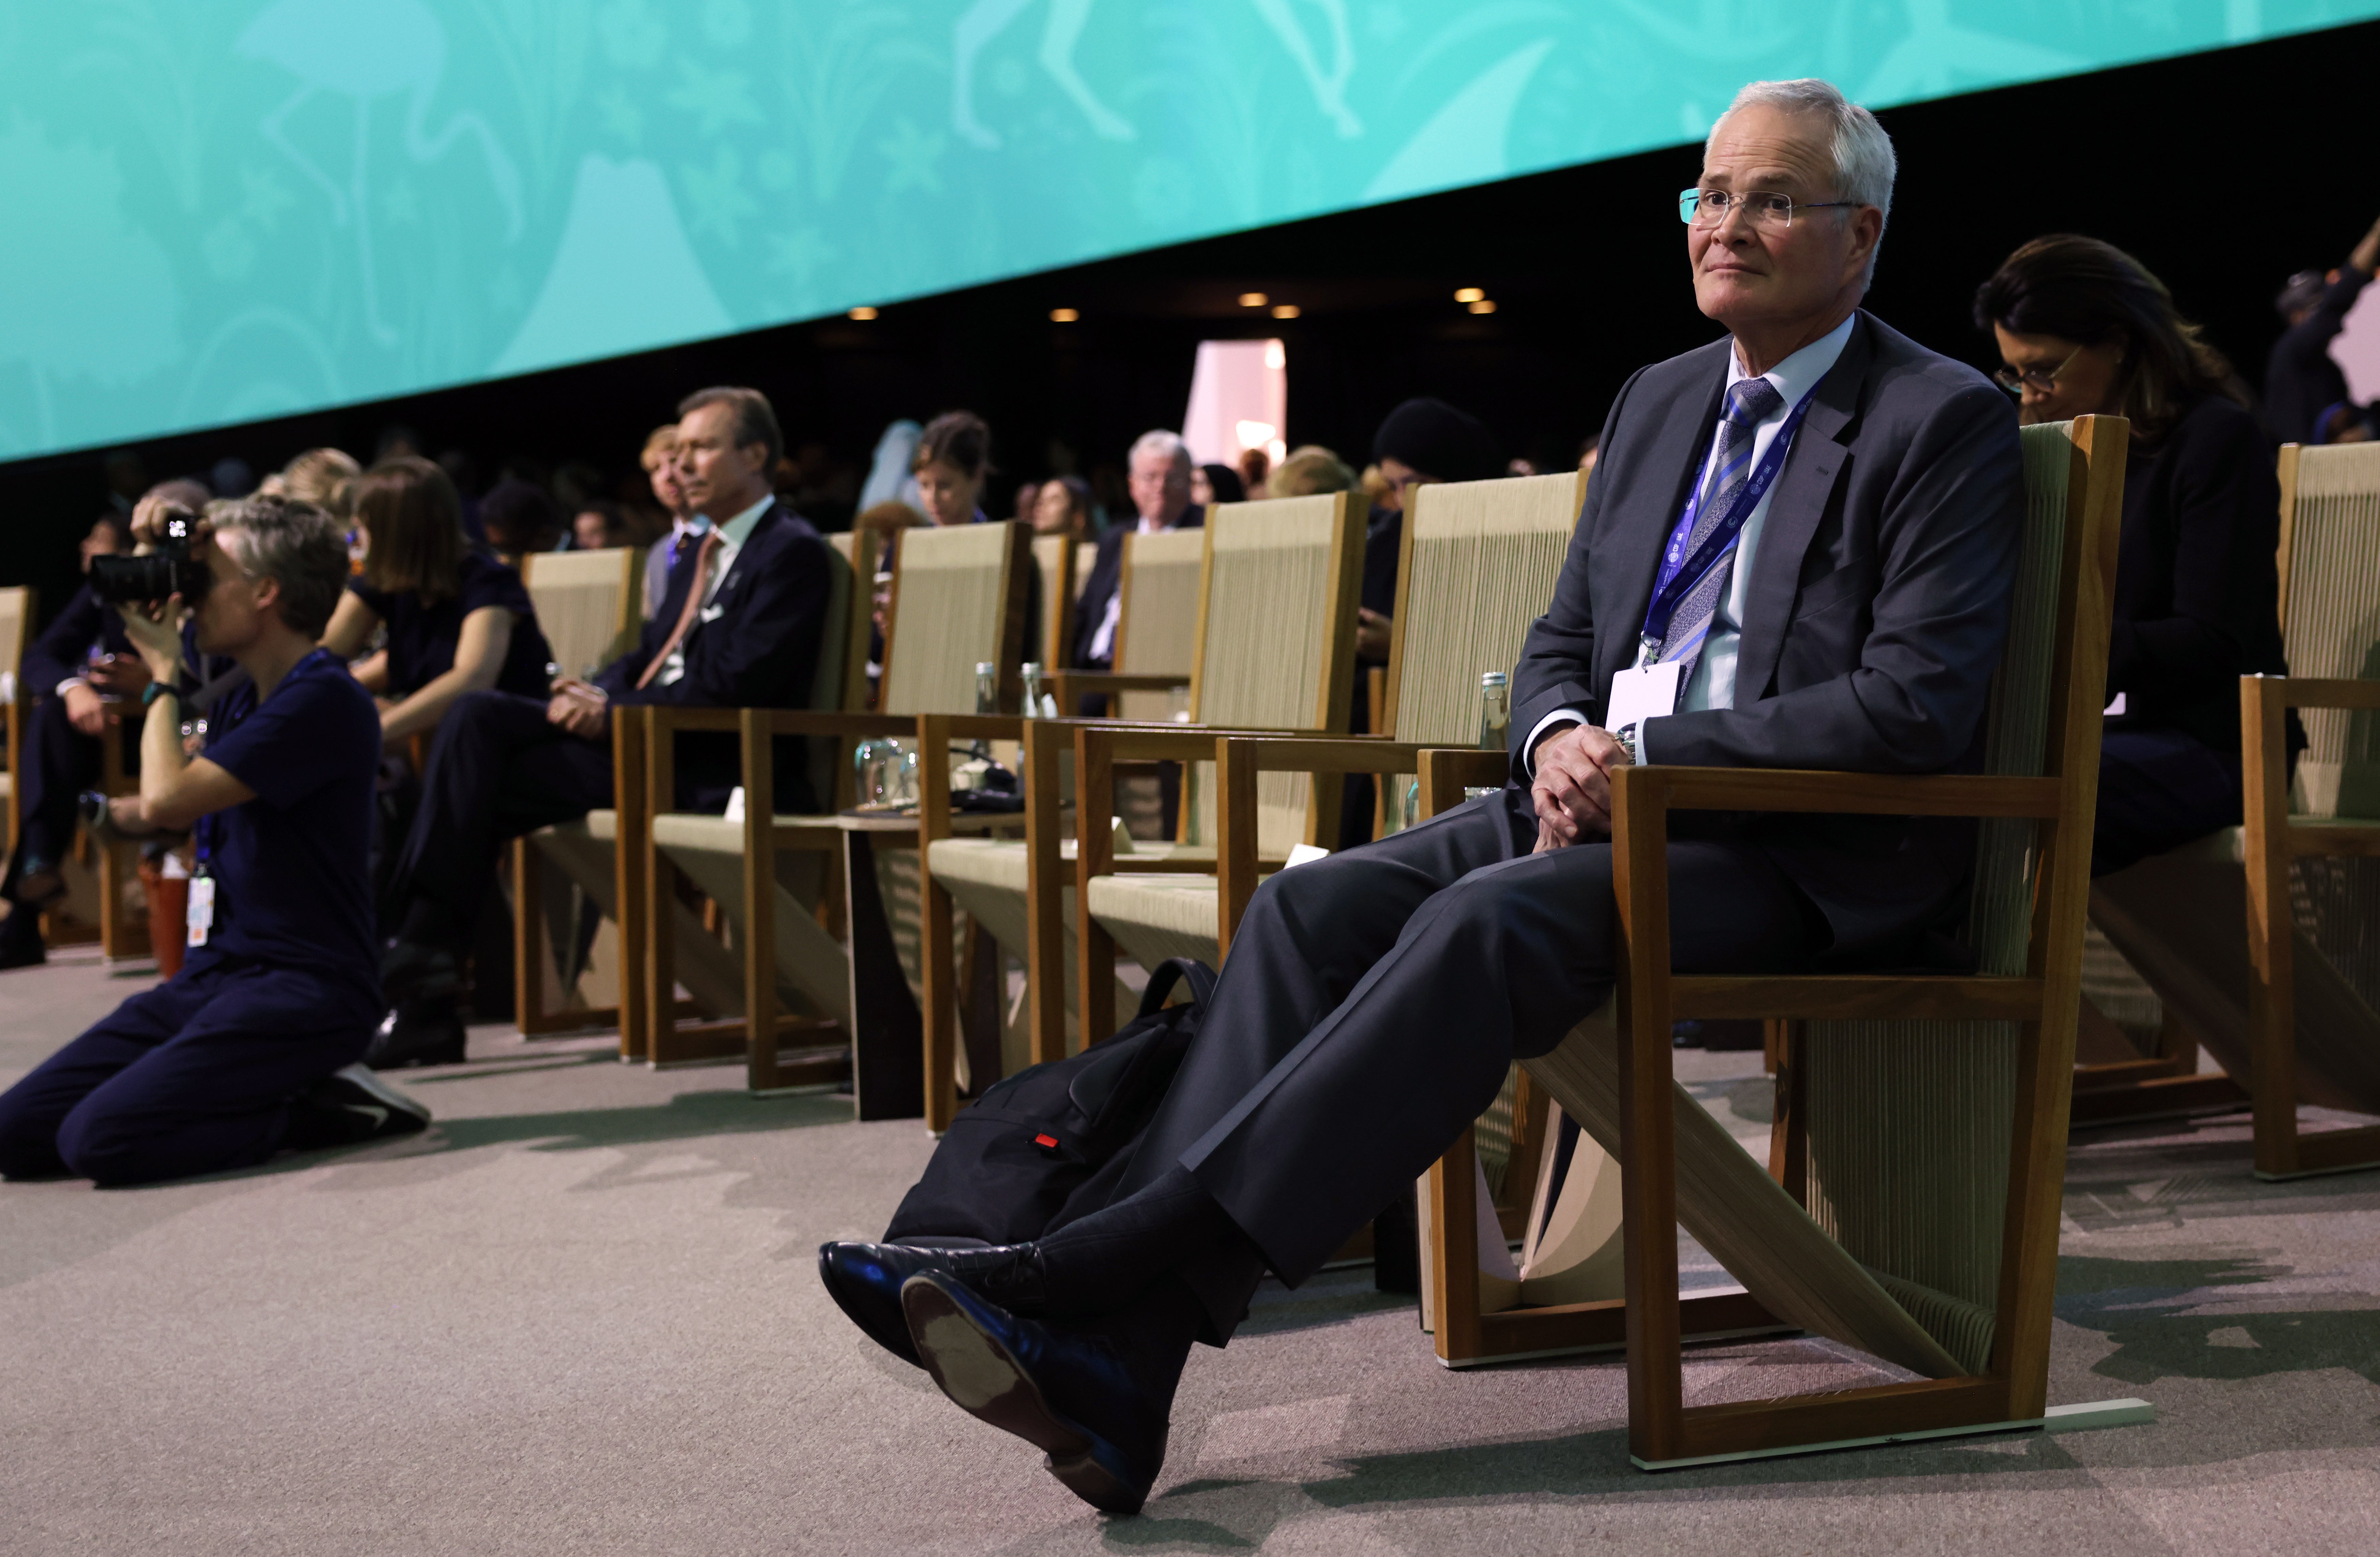 Darren Woods, chief executive officer of Exxon Mobil, at the Cop28 climate summit at Expo City in Dubai on 2 December, 2023